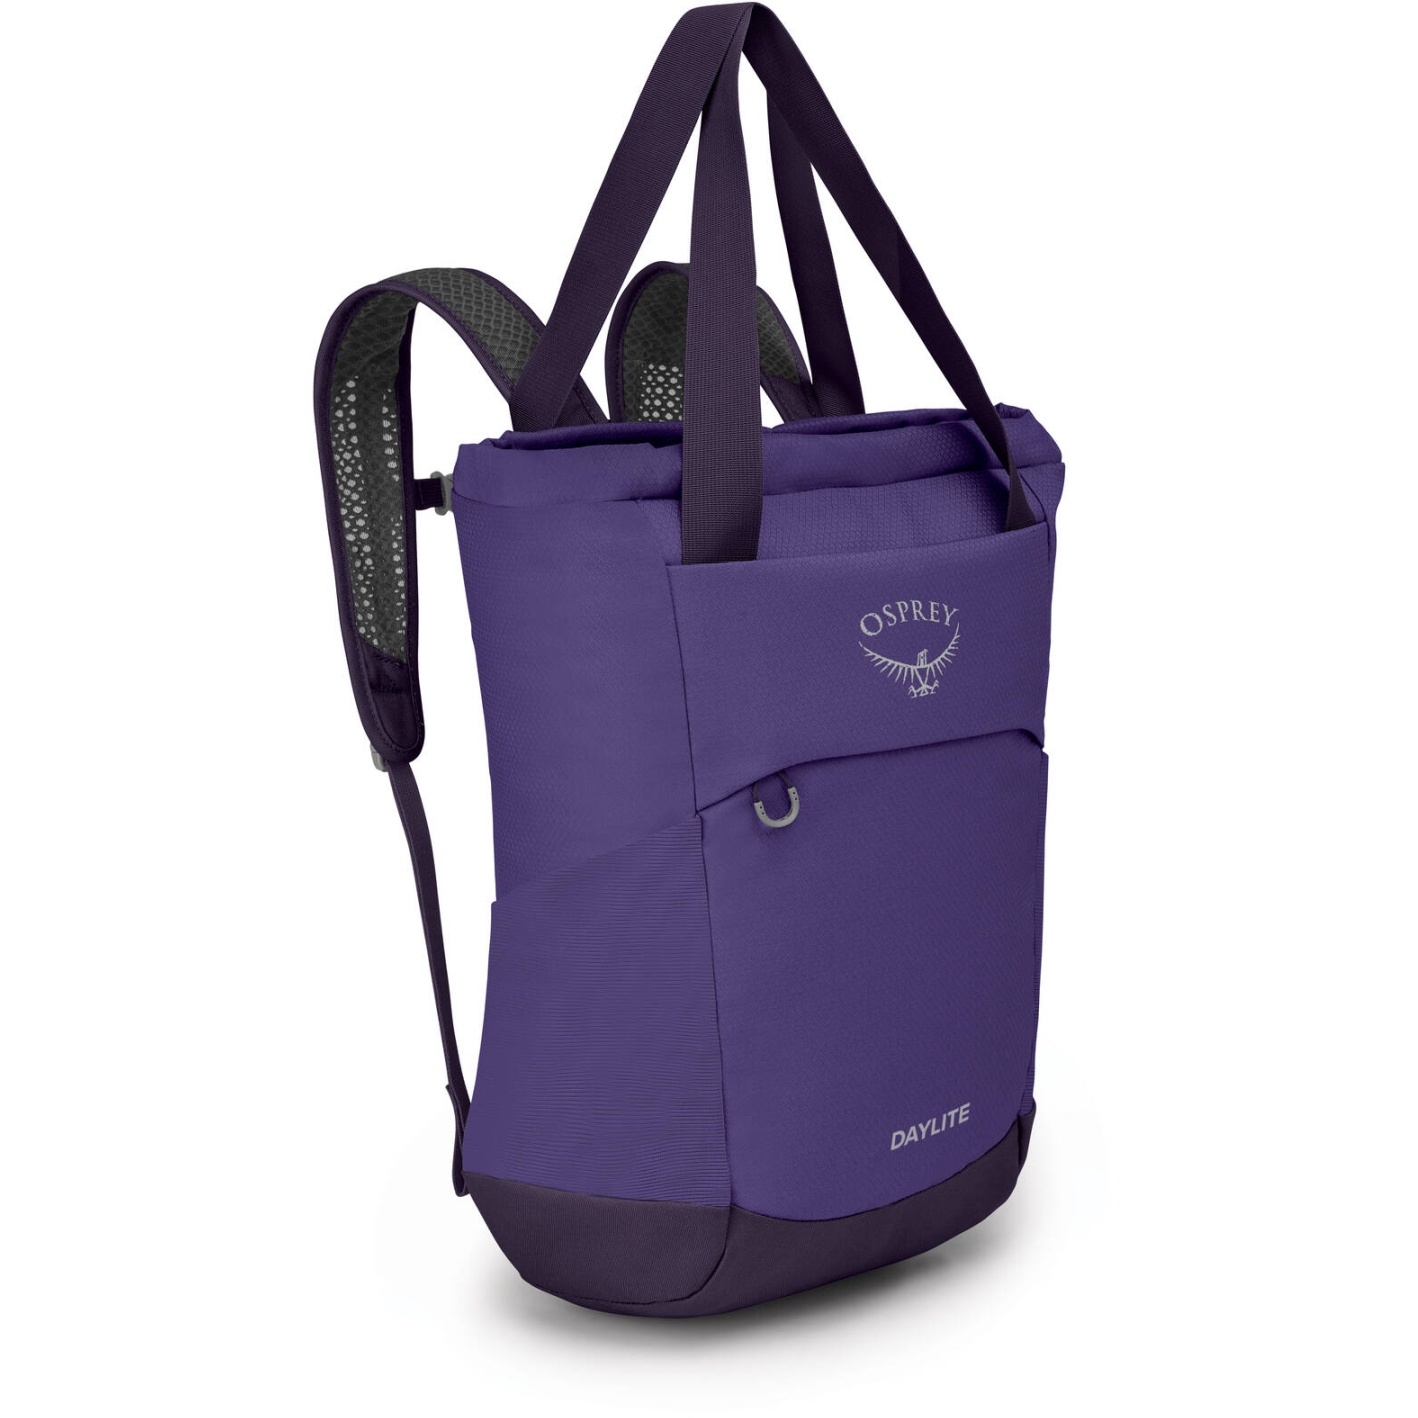 Image of Osprey Daylite Tote Pack Backpack - Dream Purple